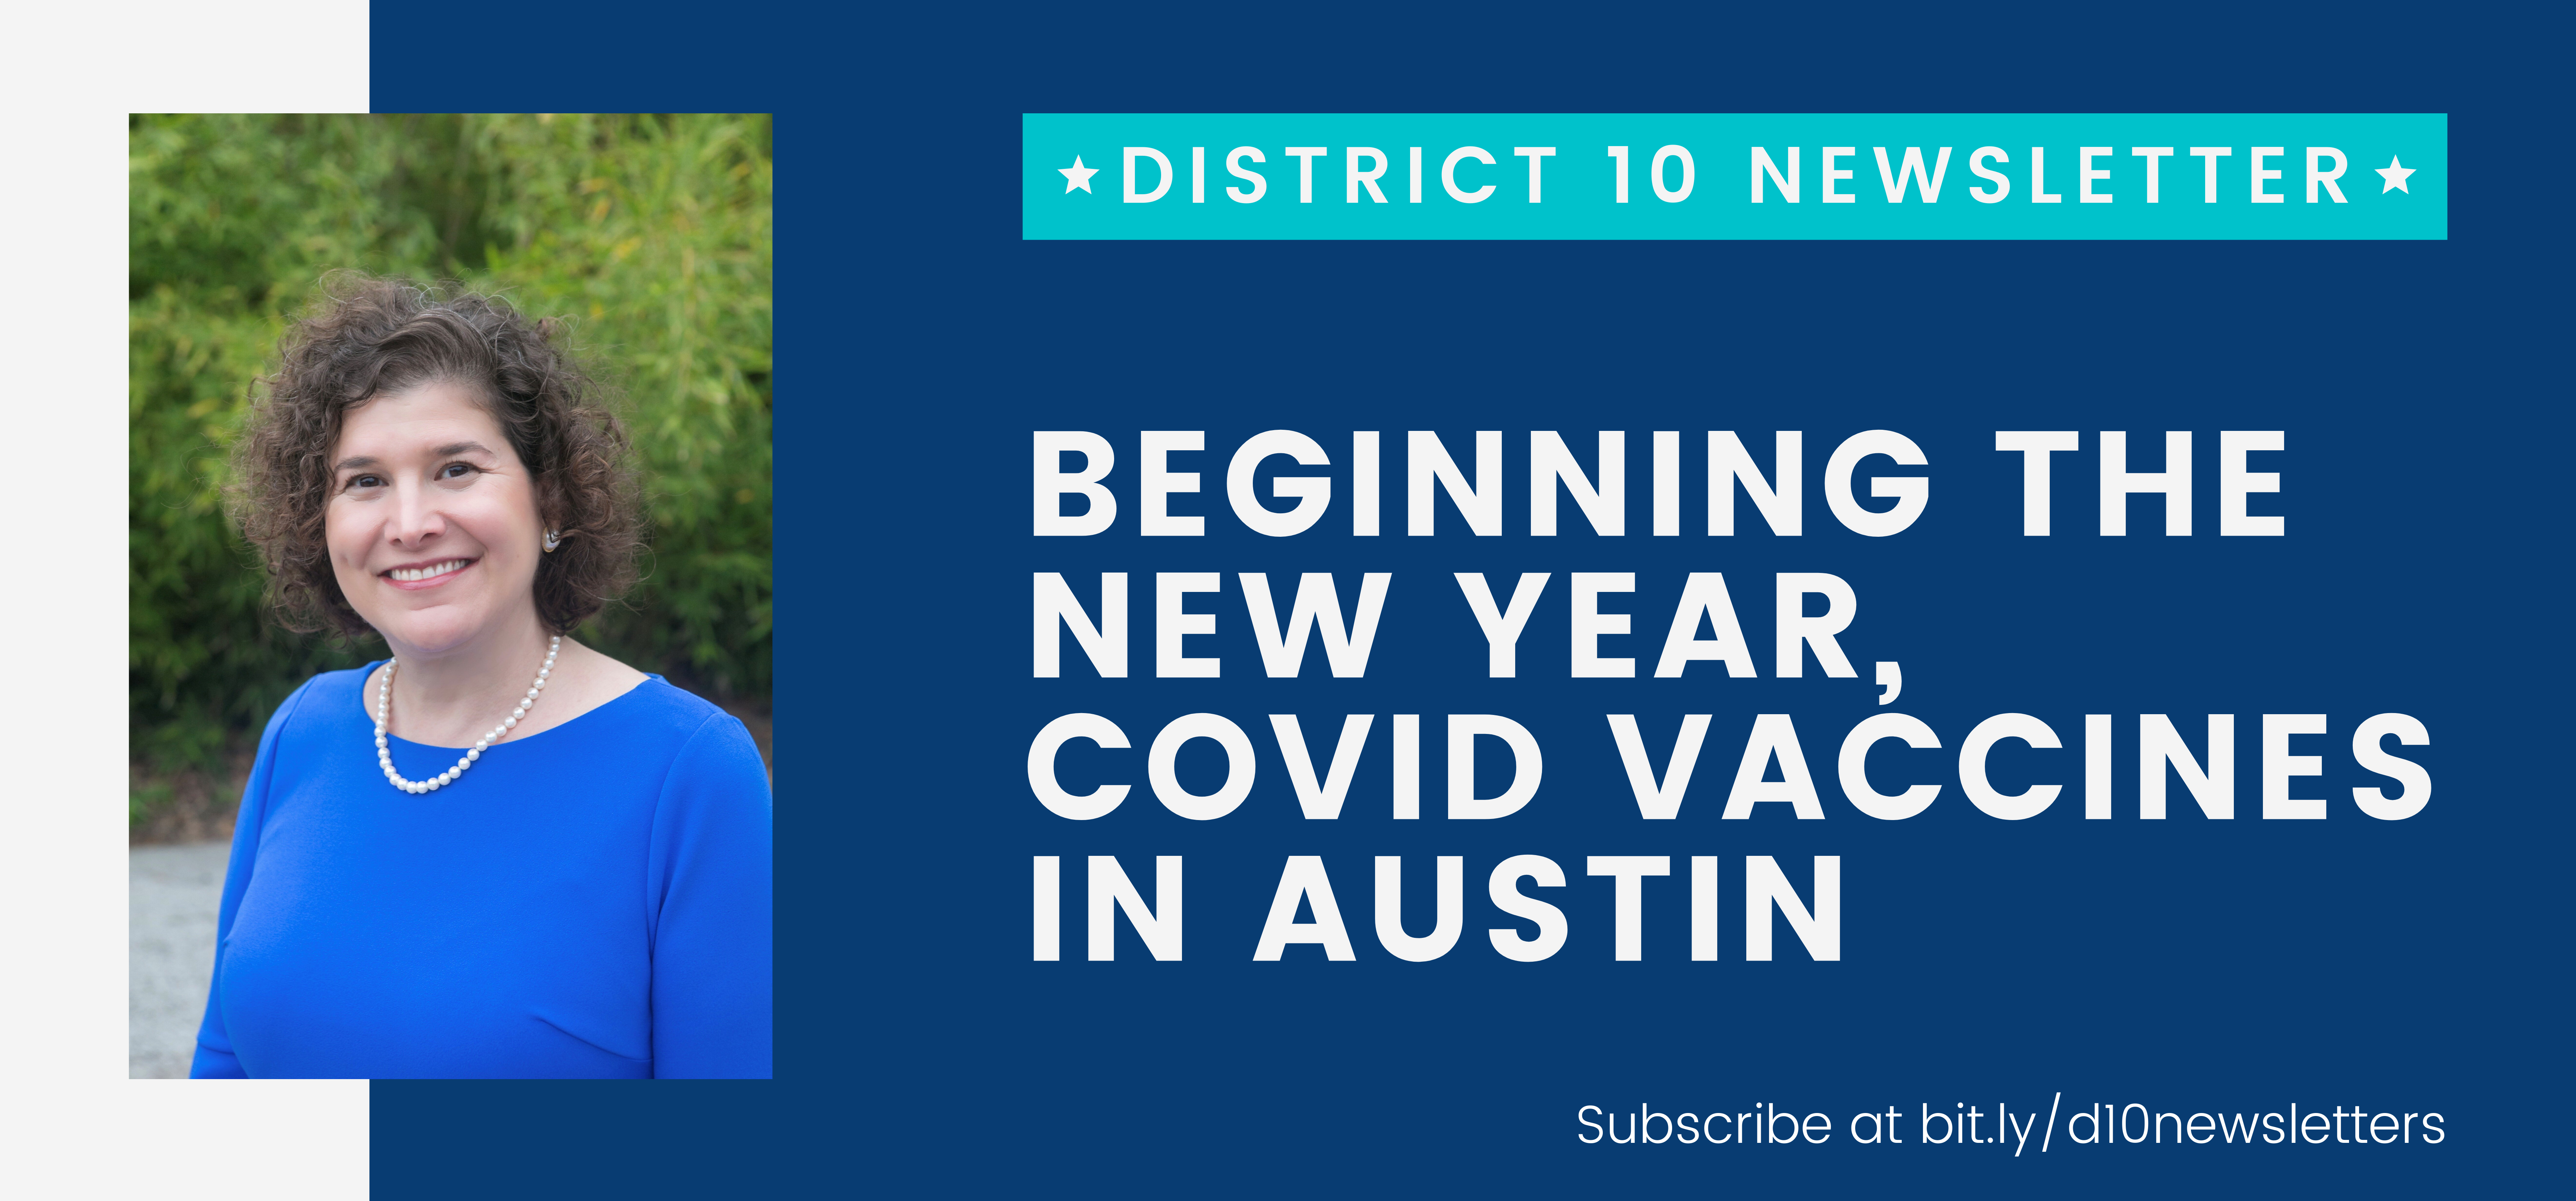 District 10 Newsletter; Beginning the New Year, COVID Vaccines in Austin. Subscribe at bit.ly/d10newsletters